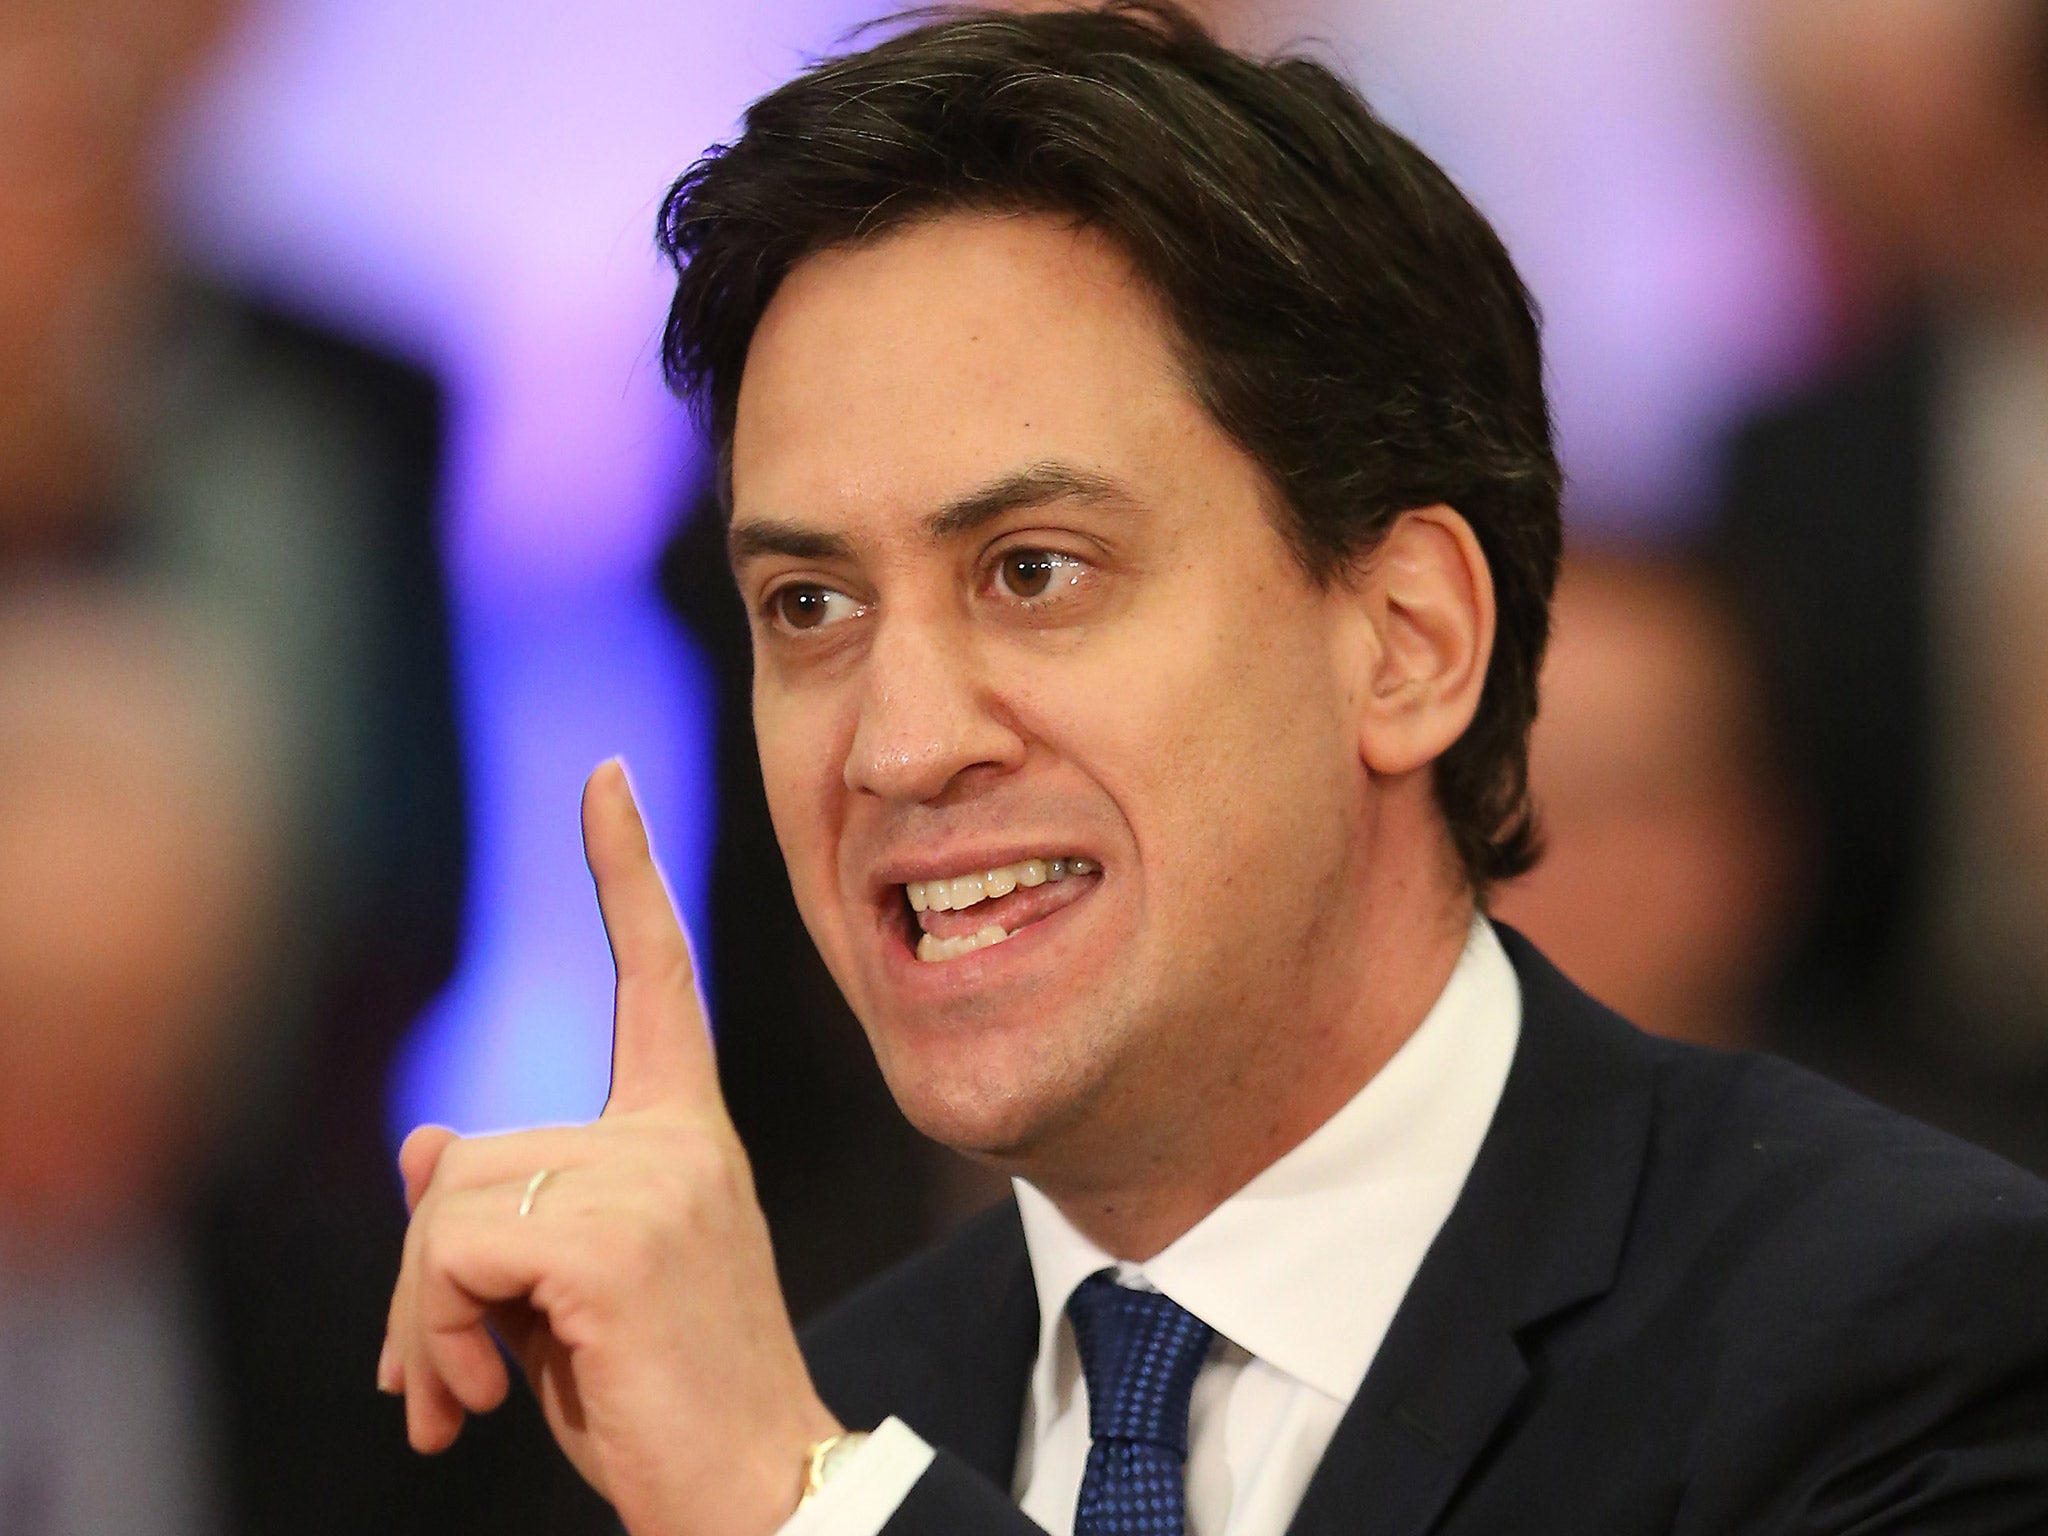 Labour leader Ed Miliband does not want to put Britain's EU membership at risk